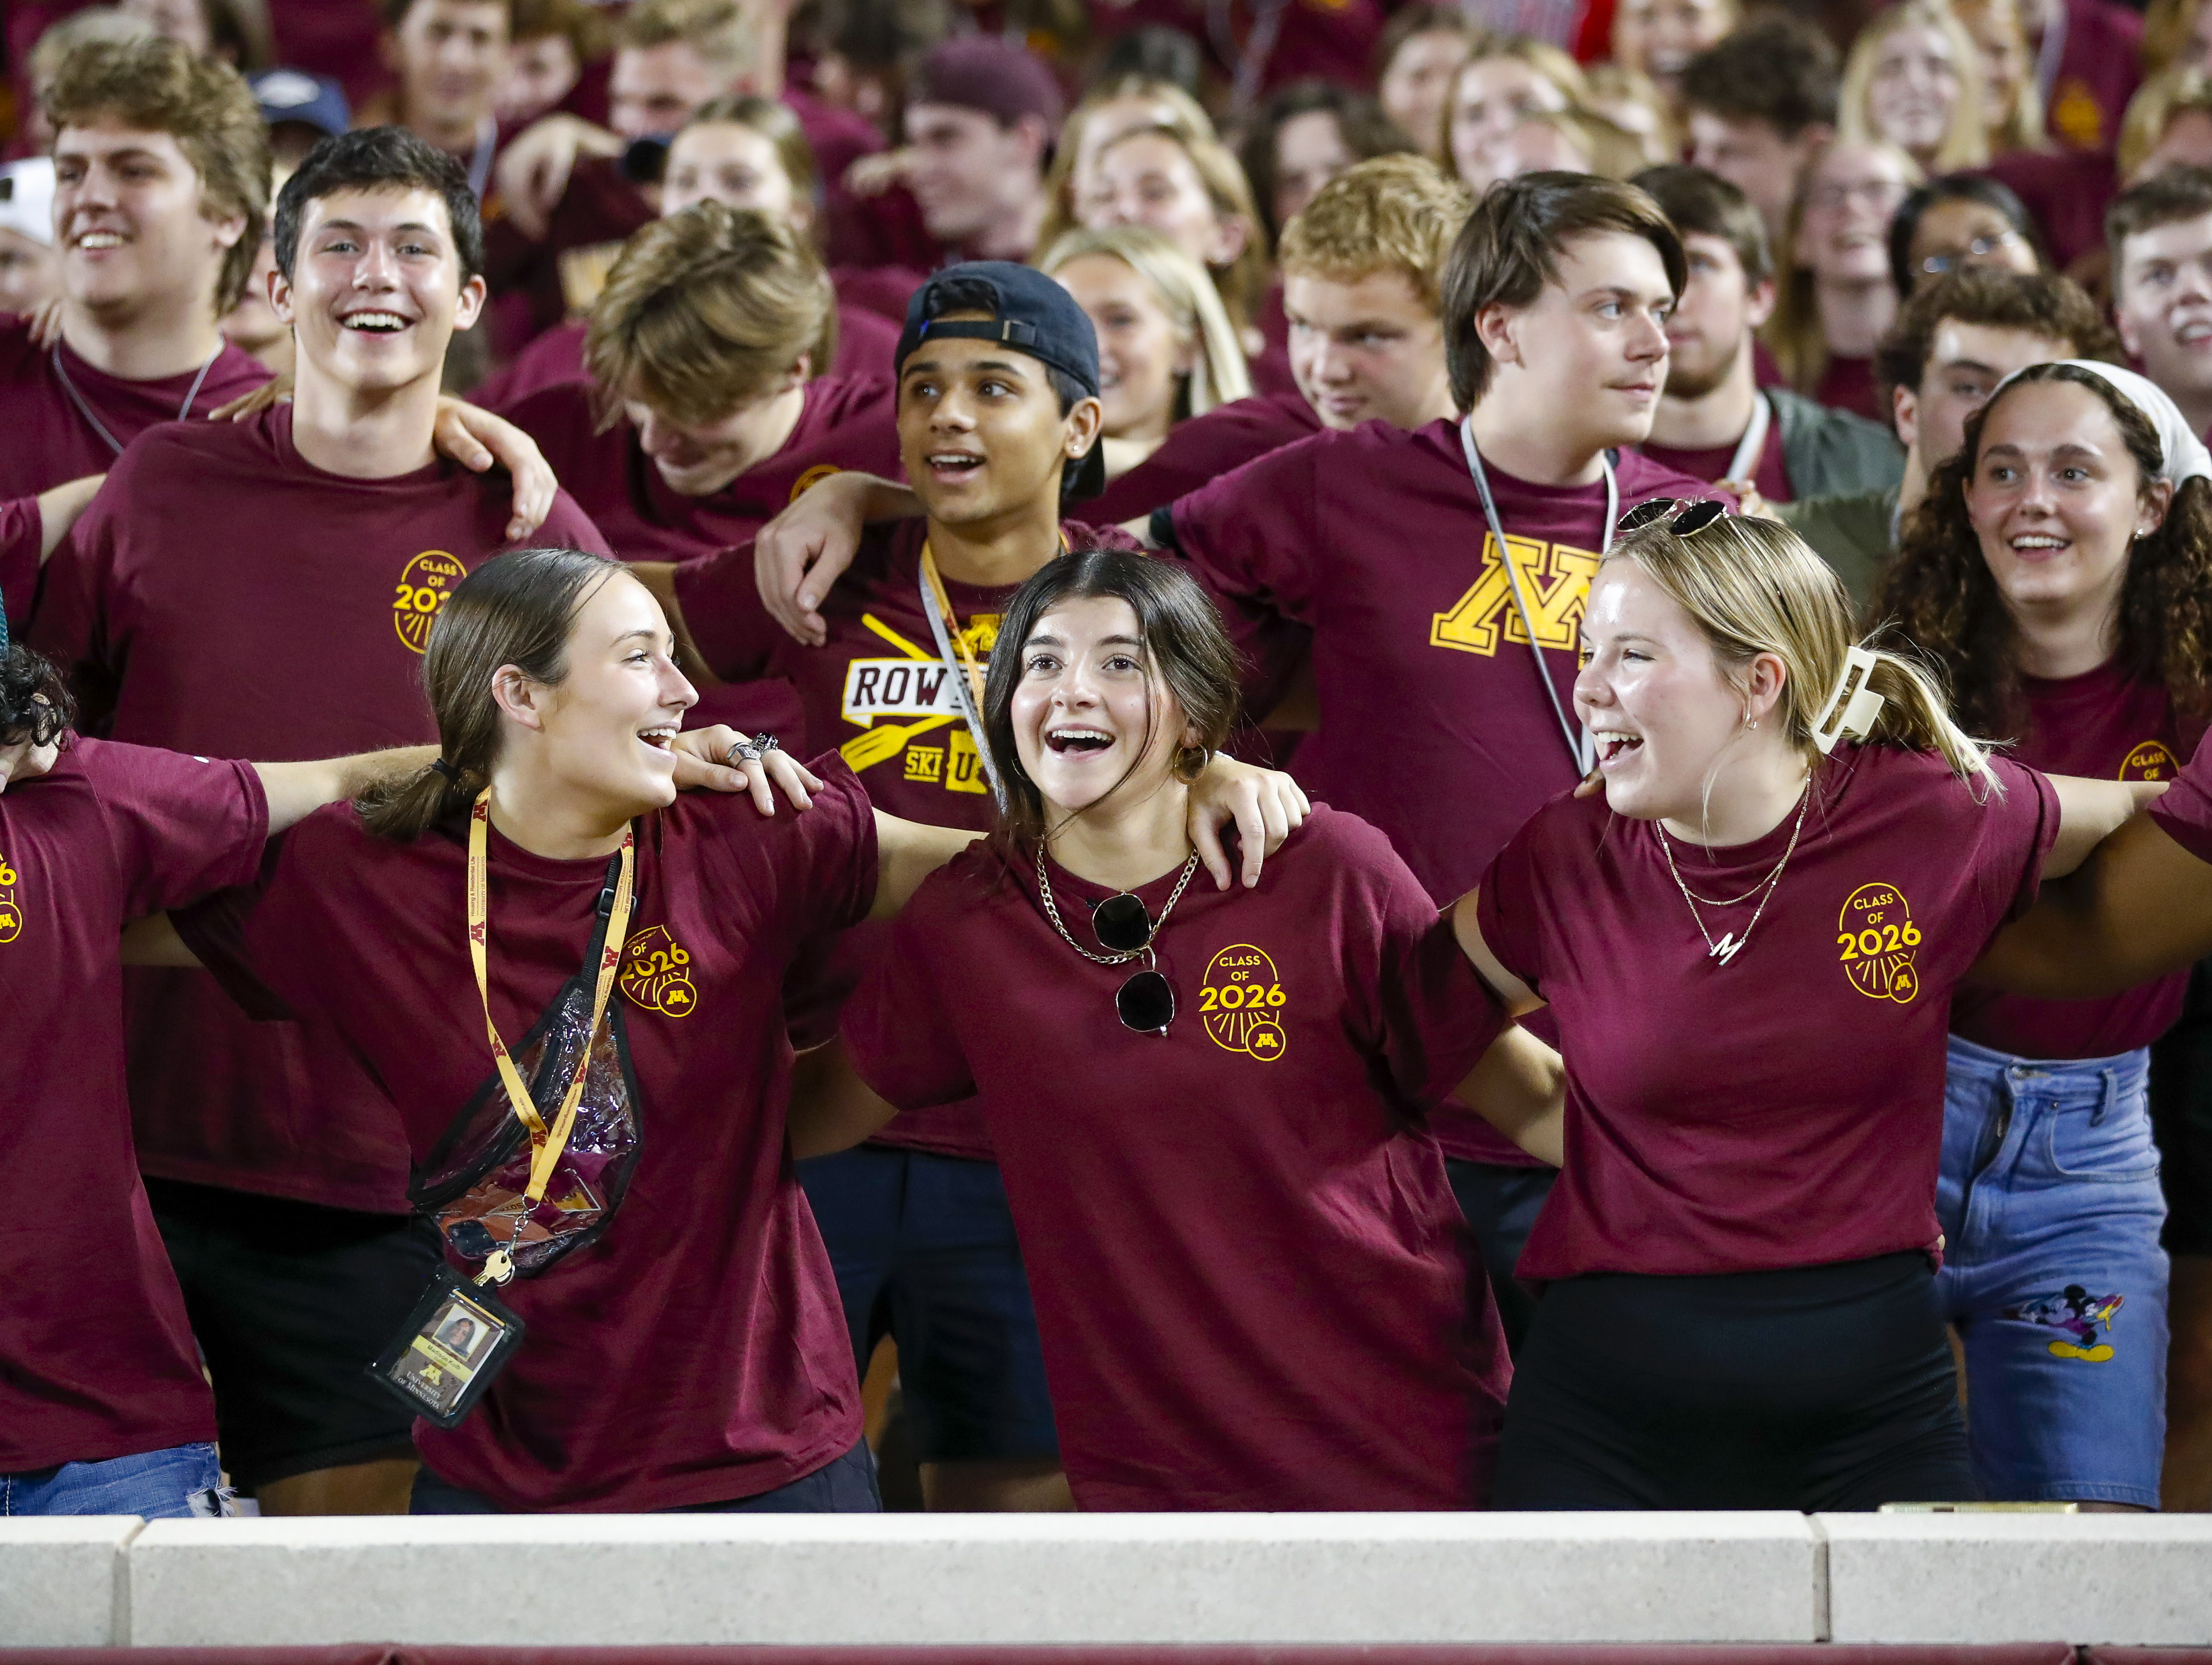 Students cheering in the stands